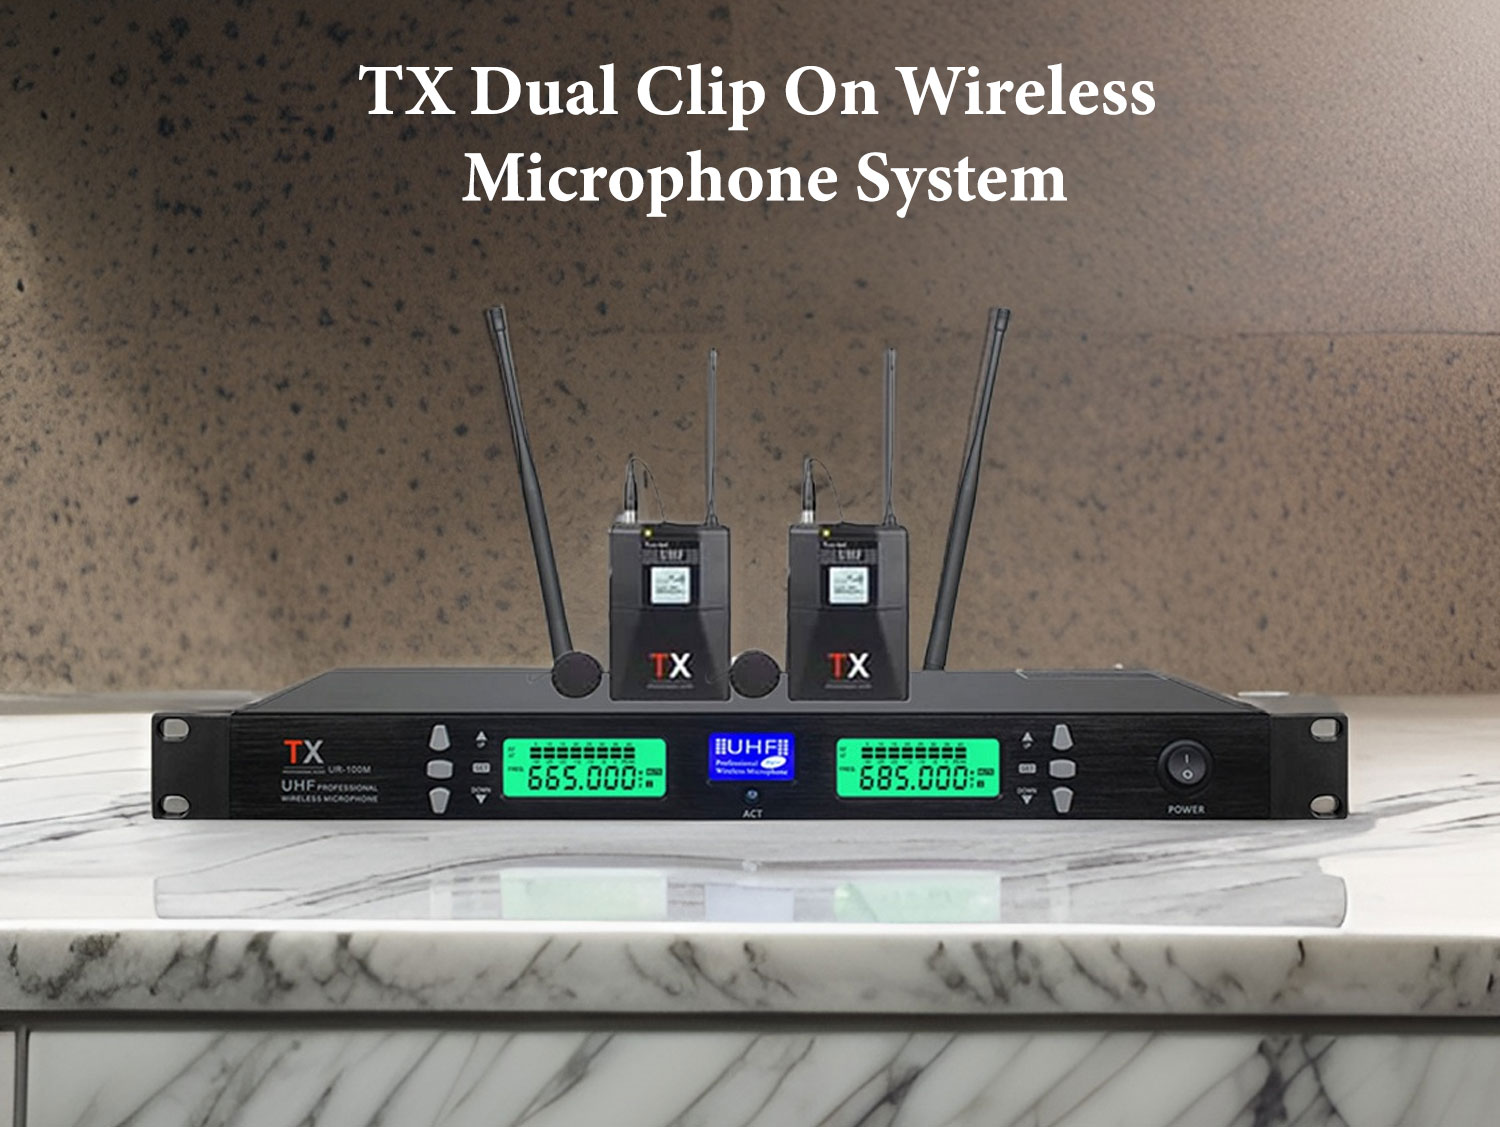 TX Dual Clip On Wireless Microphone